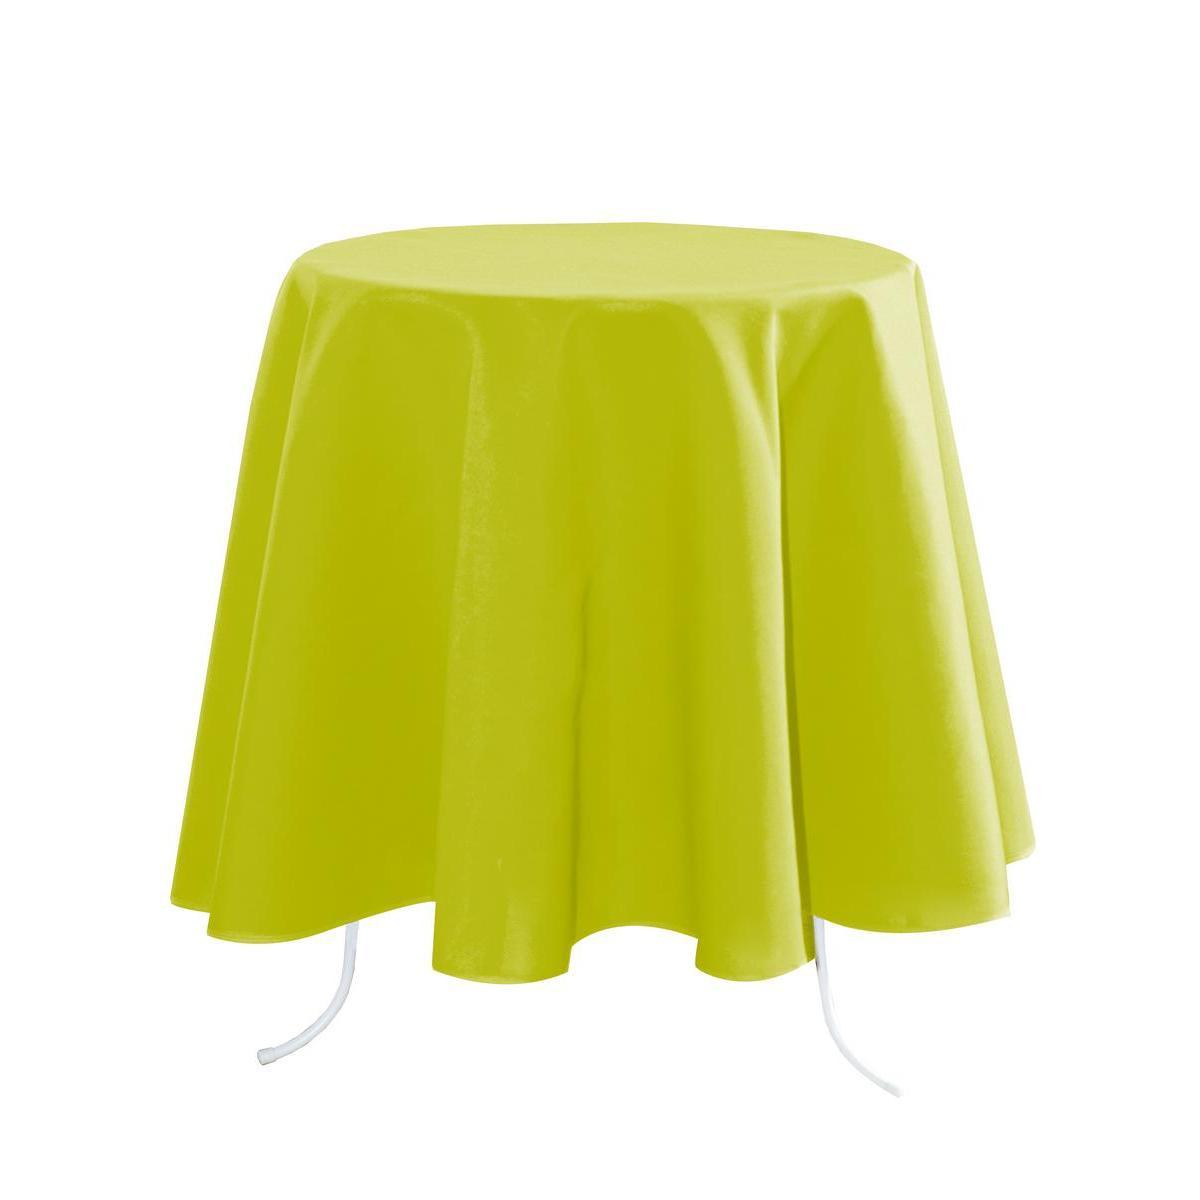 Nappe rectangulaire - 100 % Polyester - 148 x 240 cm - Vert anis